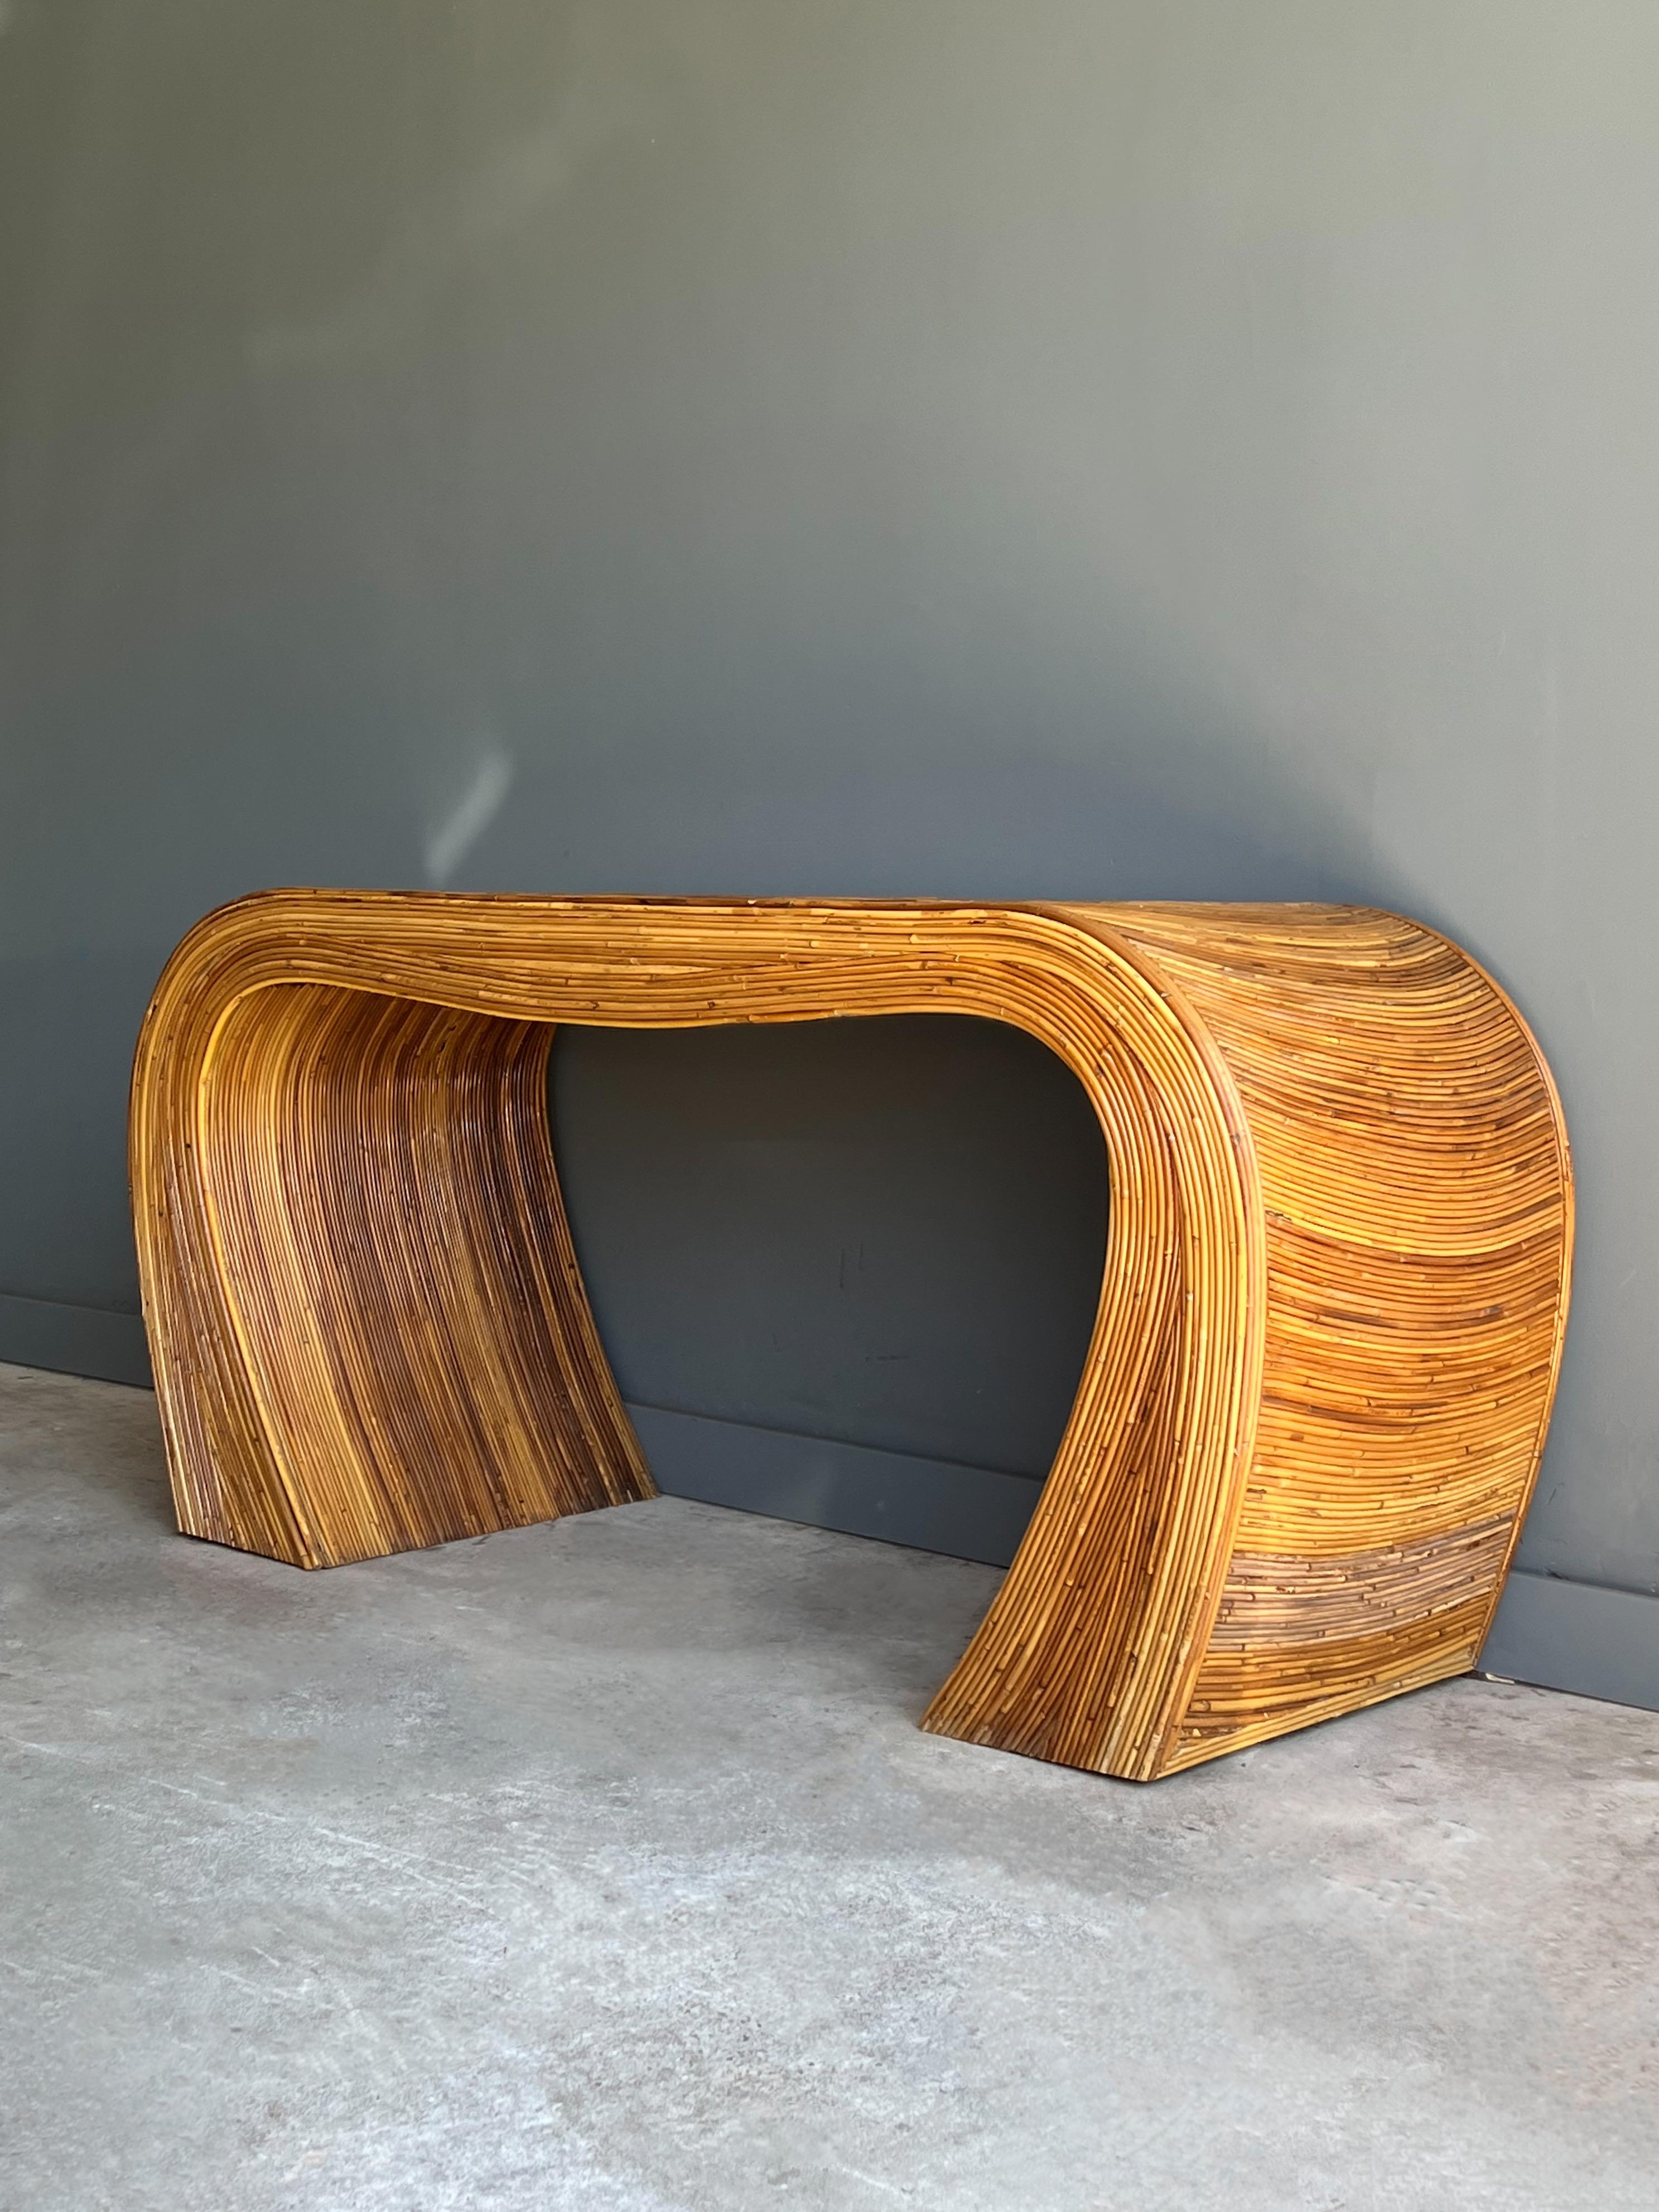 Vintage pencil reed console, circa 1960s. This beautiful console features an organic rounded shape with the attractive circular pattern on top. Lovely aged fluctuation of coloring. Patina all around. Some wear as shown. 

This sculptural table can